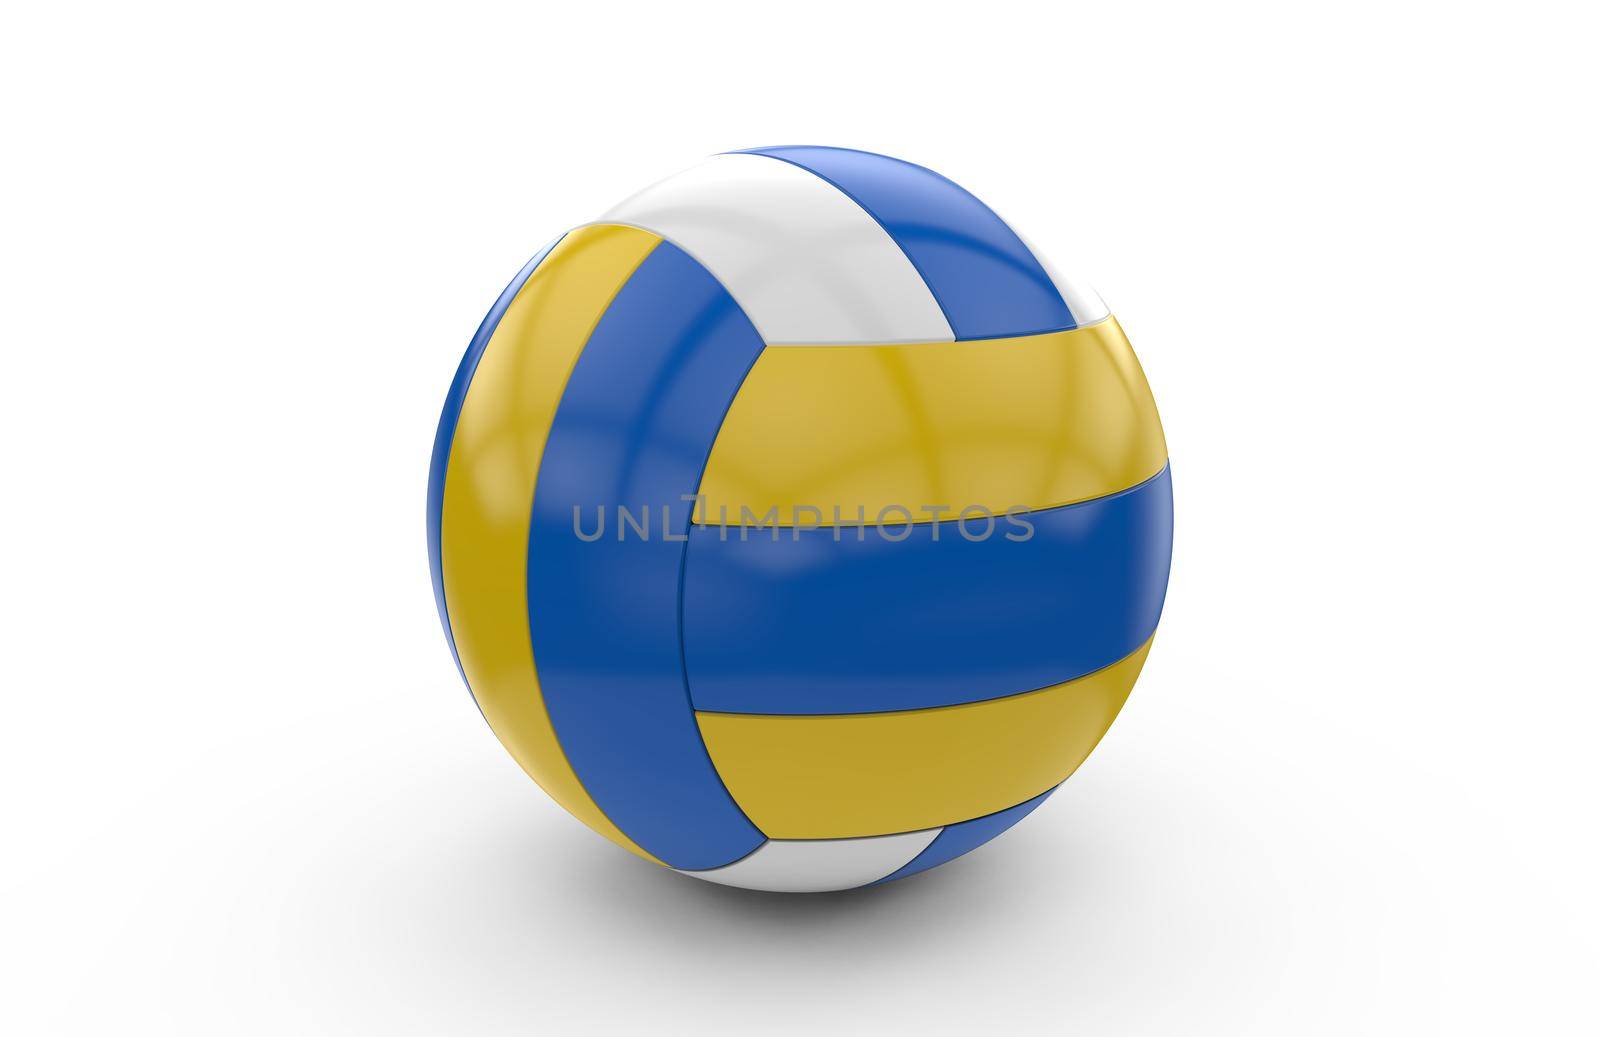 3D rendering of a volley ball by cla78